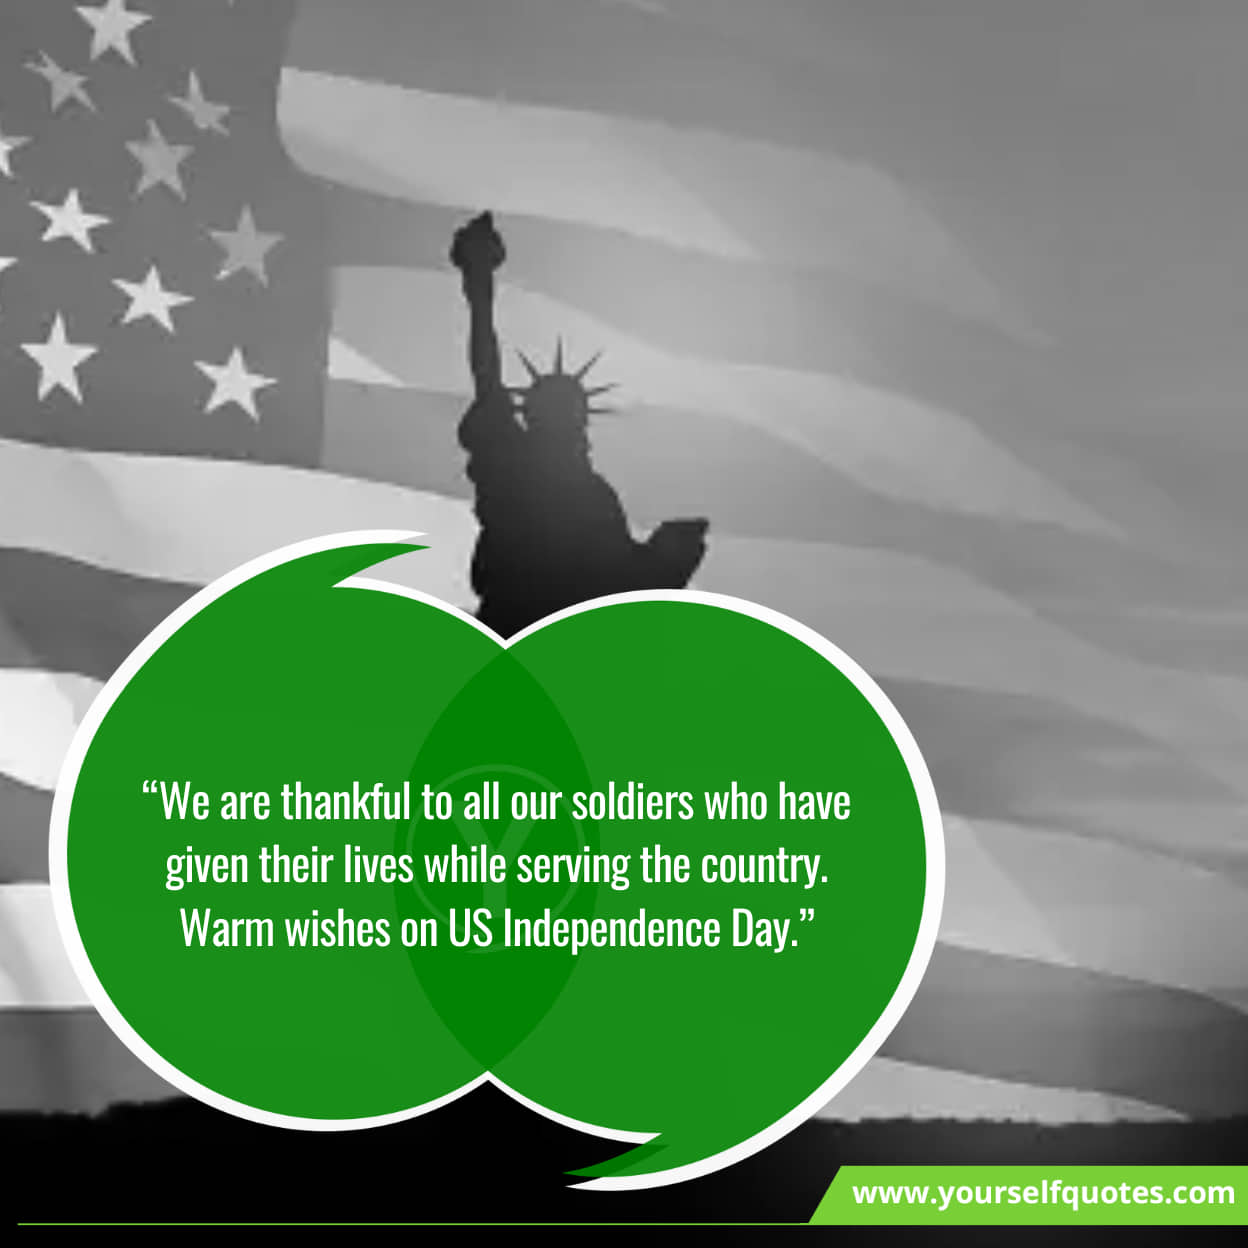 Inspirational Independence Day USA quotes